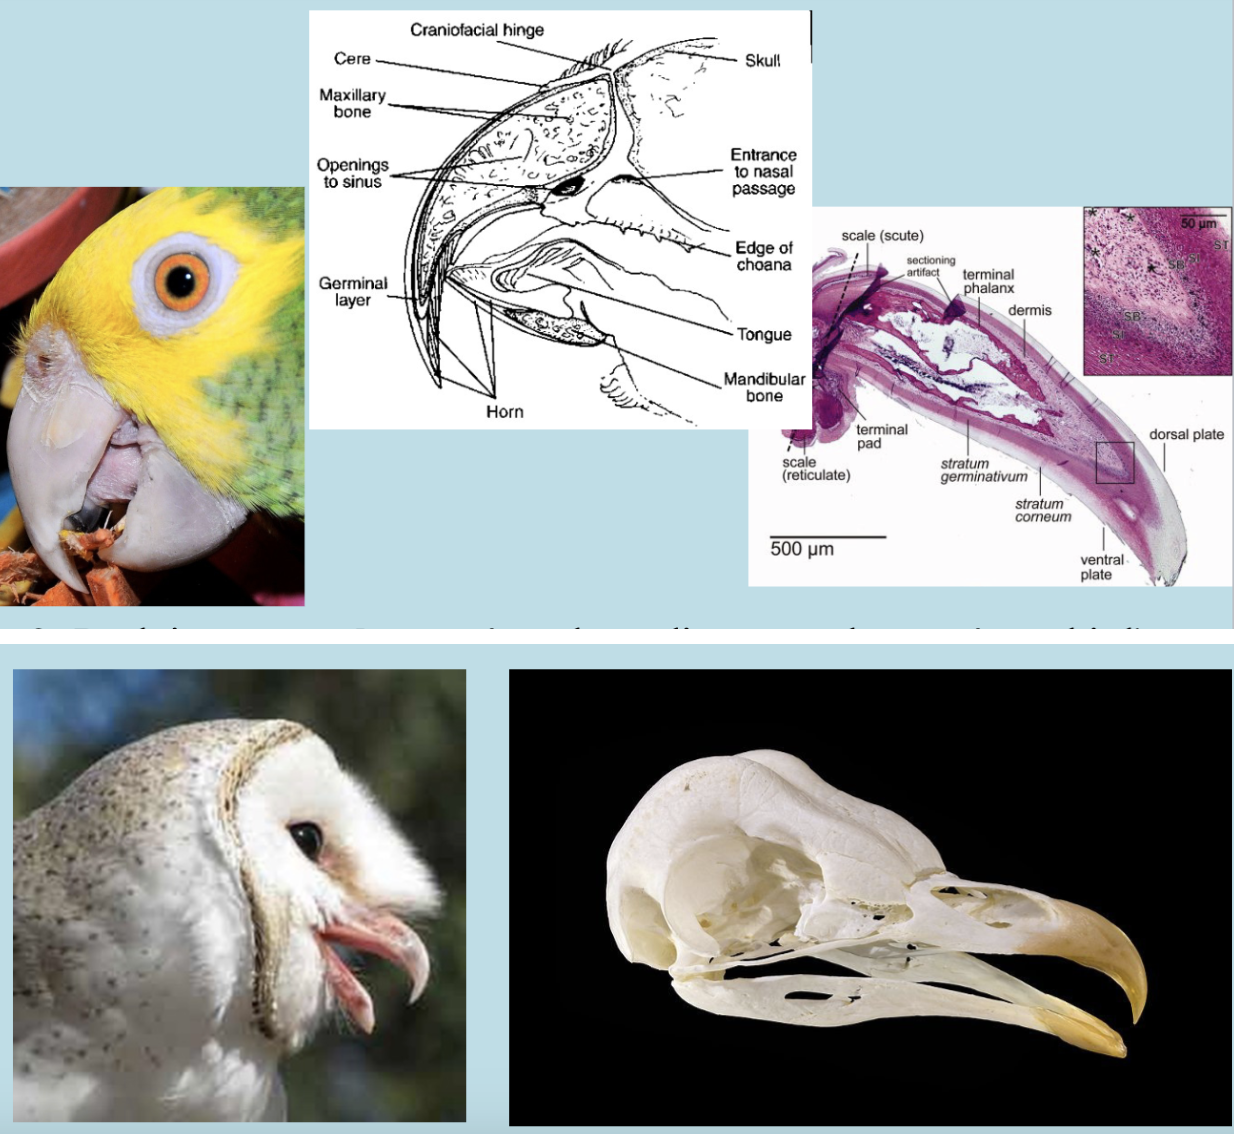 <p>1- Beak is a hard, tough epidermal structure (keratin= the same tough, insoluble protein found in fingernails, hoofs and horns) attached to a bone base (Maxilla = upper jaw, and Mandible = lower jaw; which acts as a form to produce the beak’s shape) 2- The beak has a well-developed superficial innervation originating from the bony structure and extends through the germinal layer (contains blood and nerve supply to support beak growth and sensation) 3- Beak is constantly growing, depending upon the species, a bird&apos;s beak grows from 1 to 3 inches a year 4- Beaks vary significantly in size, shape, color, and texture, according to their main function.</p><ul><li><p>Eating</p></li><li><p>Grooming</p></li><li><p>Manipulating objects</p></li><li><p>killing prey</p></li><li><p>Fighting</p></li><li><p>Probing for food</p></li><li><p>Courtship</p></li><li><p>Feeding young 5- Normal and abnormal beak growth and beak wearing and trimming</p></li></ul>